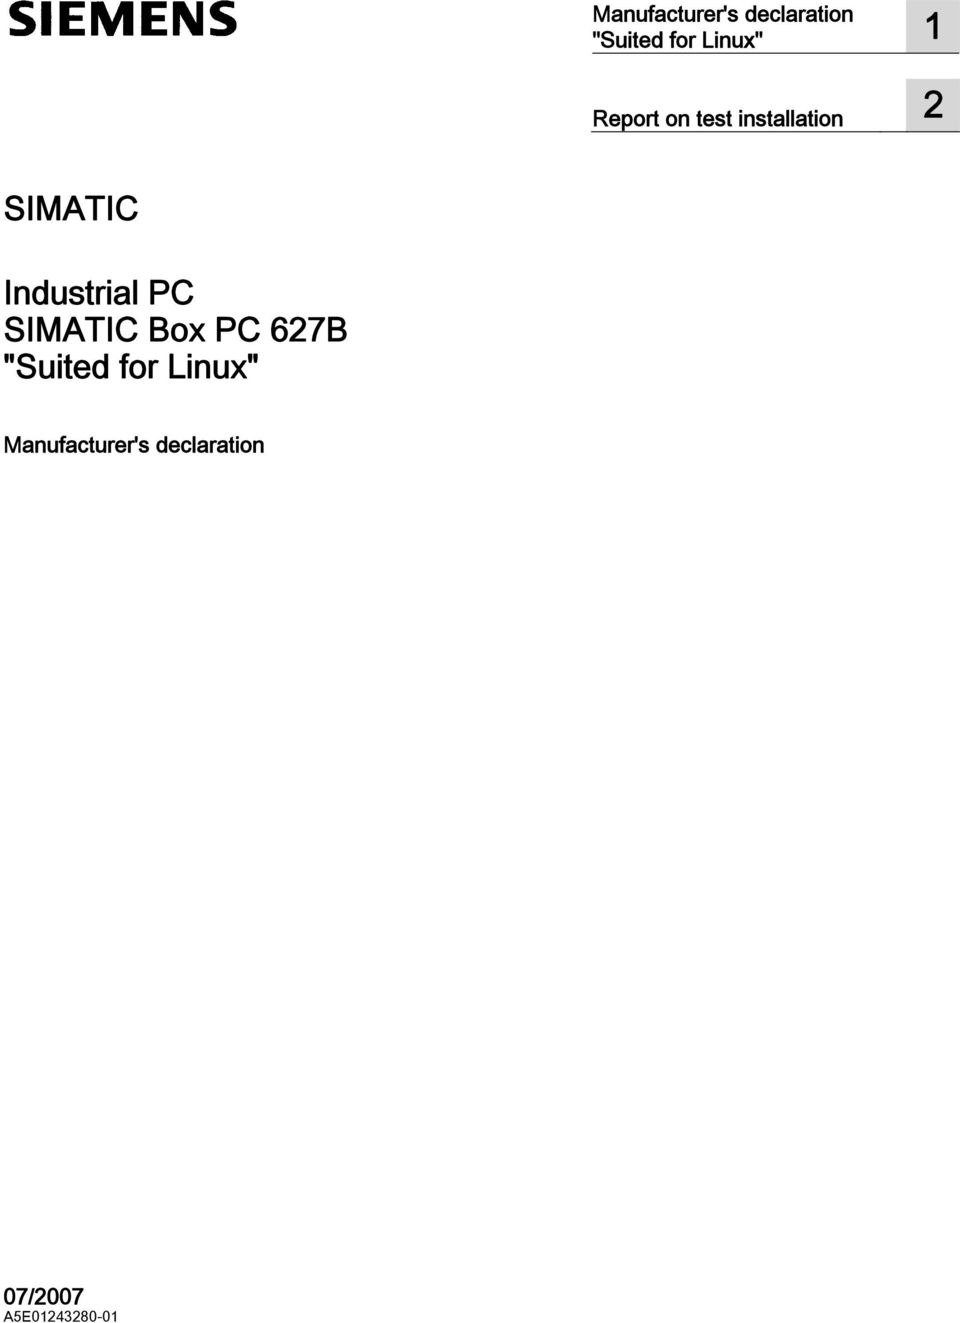 Industrial PC SIMATIC Box PC 627B "Suited for